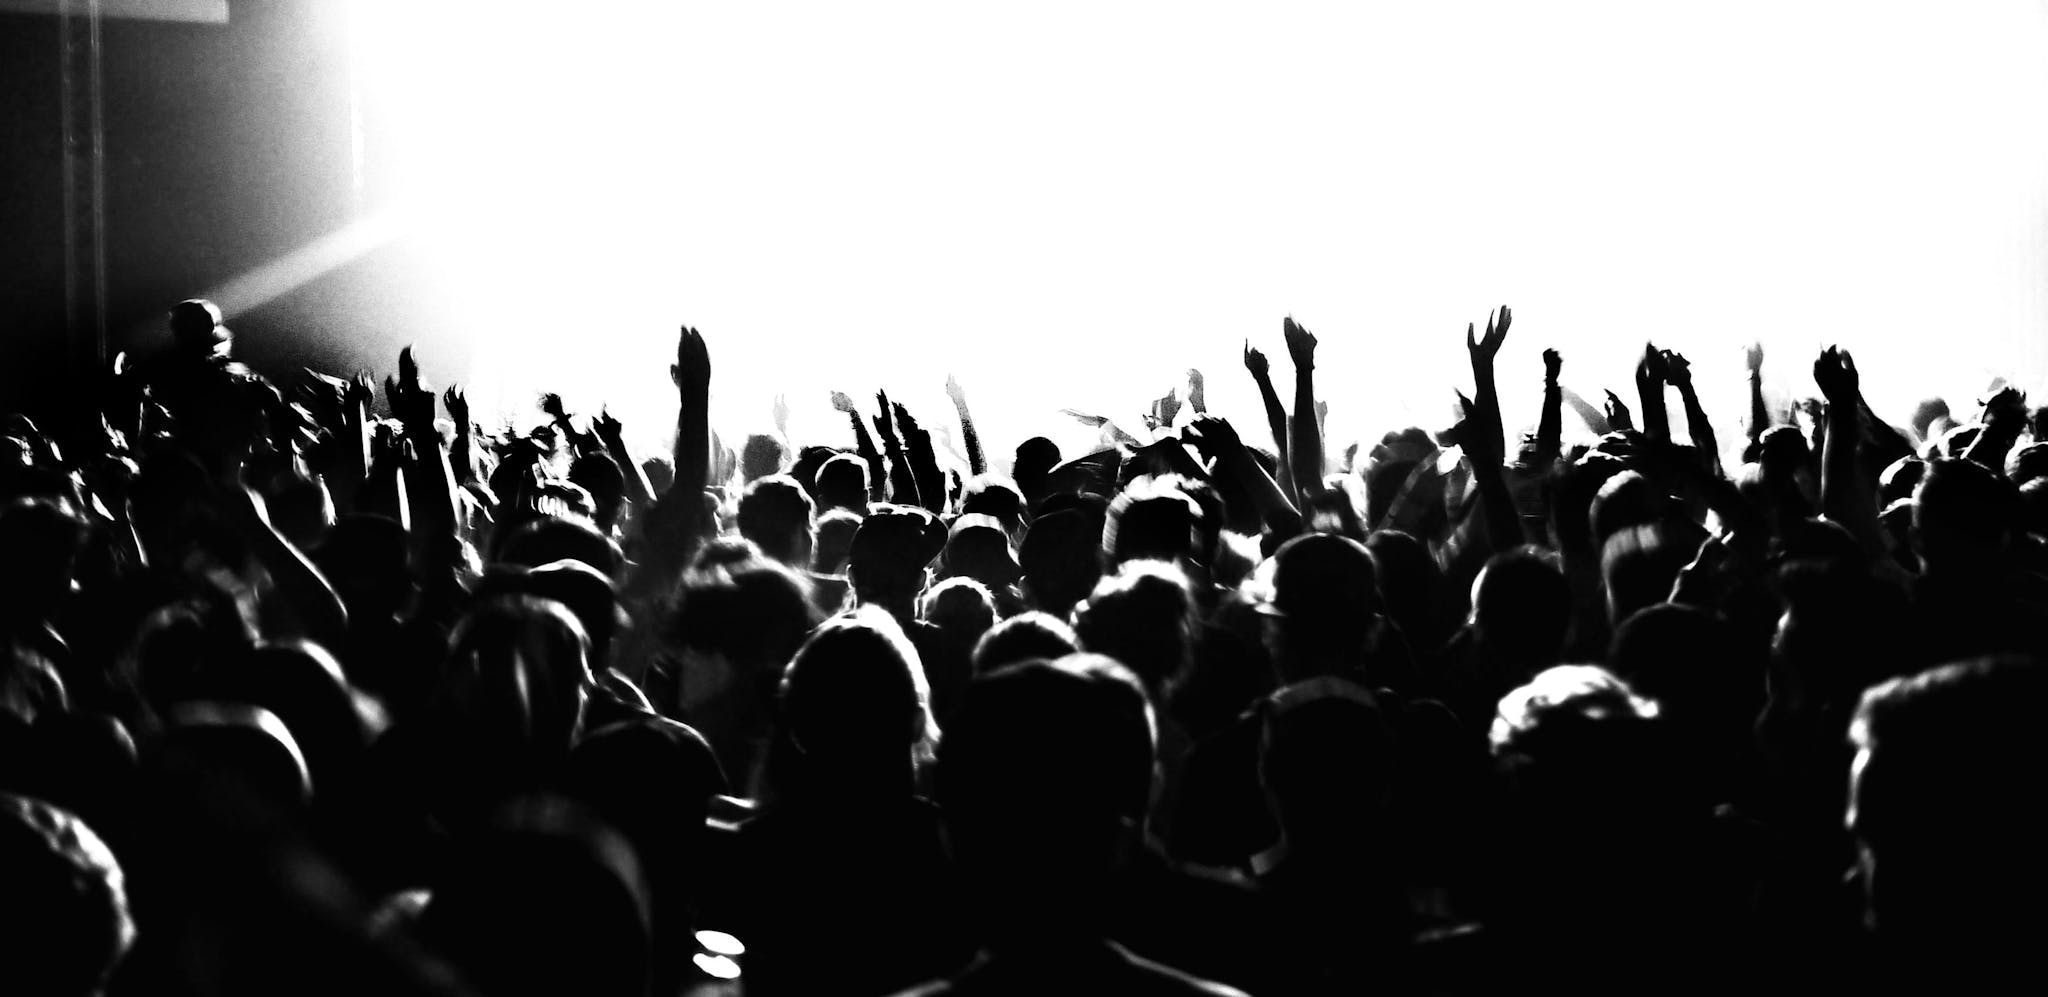 Black and white image of a crowd of people standing, cheering, and dancing at an event